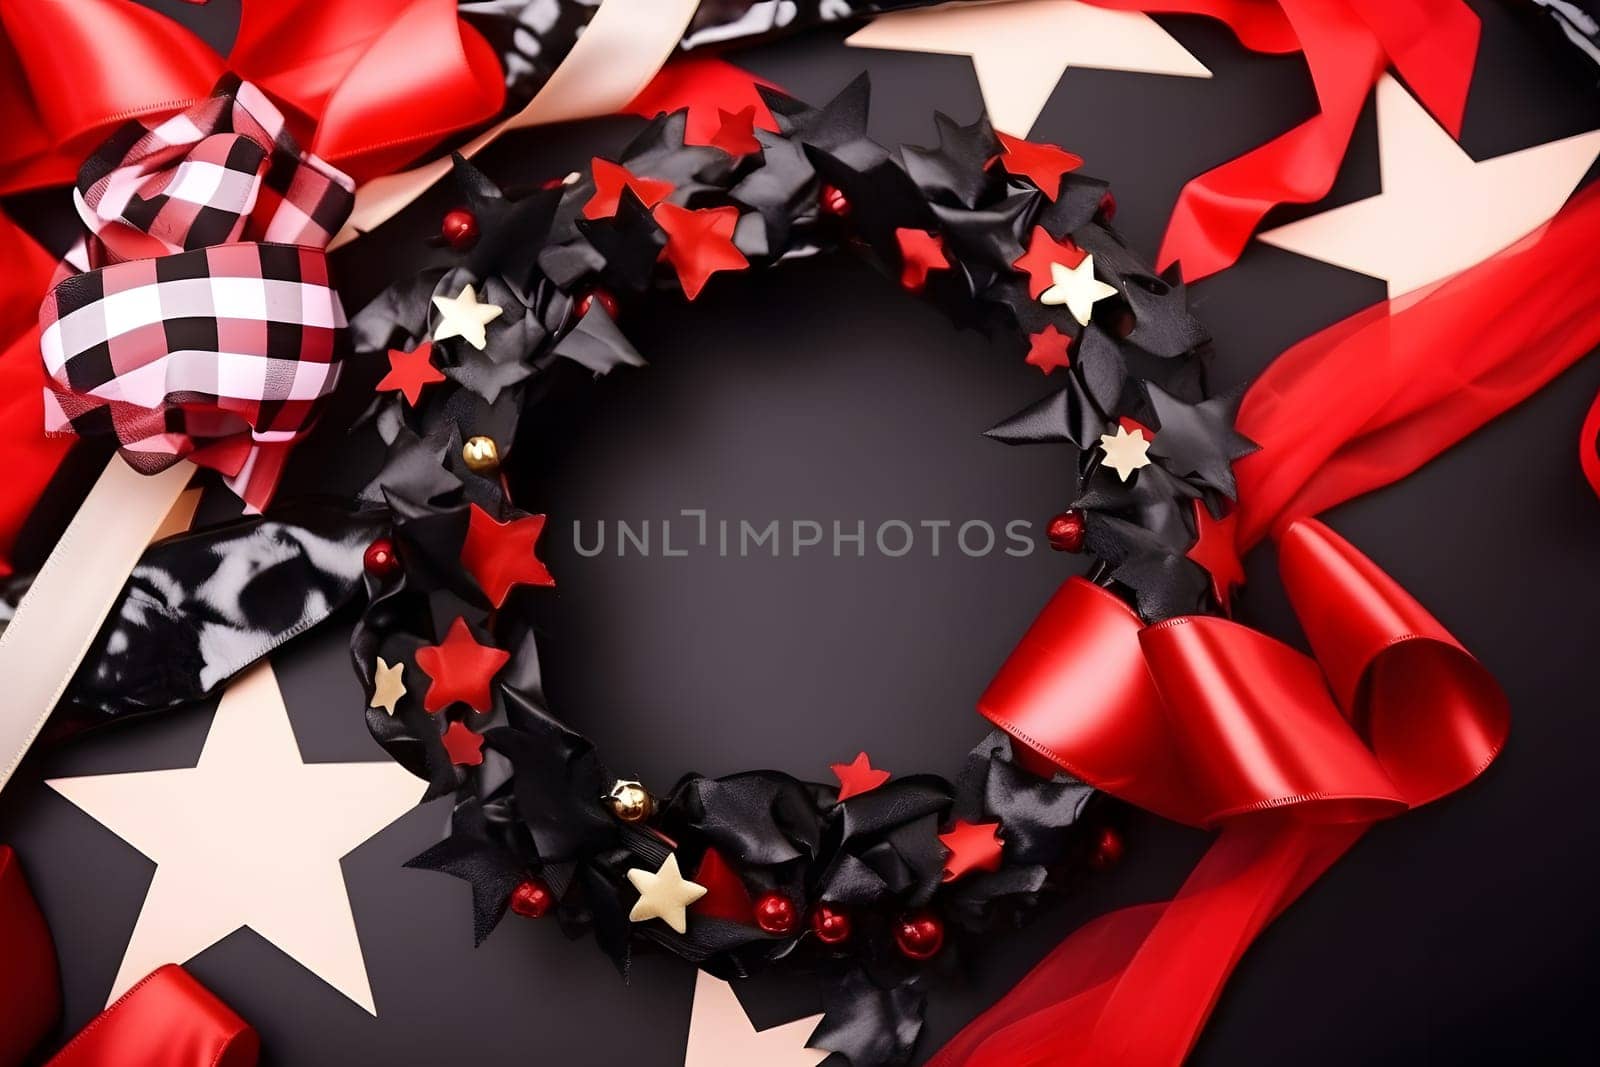 white, black, red stars and ribbons on black background - celebration background. Neural network generated in May 2023. Not based on any actual person, scene or pattern.